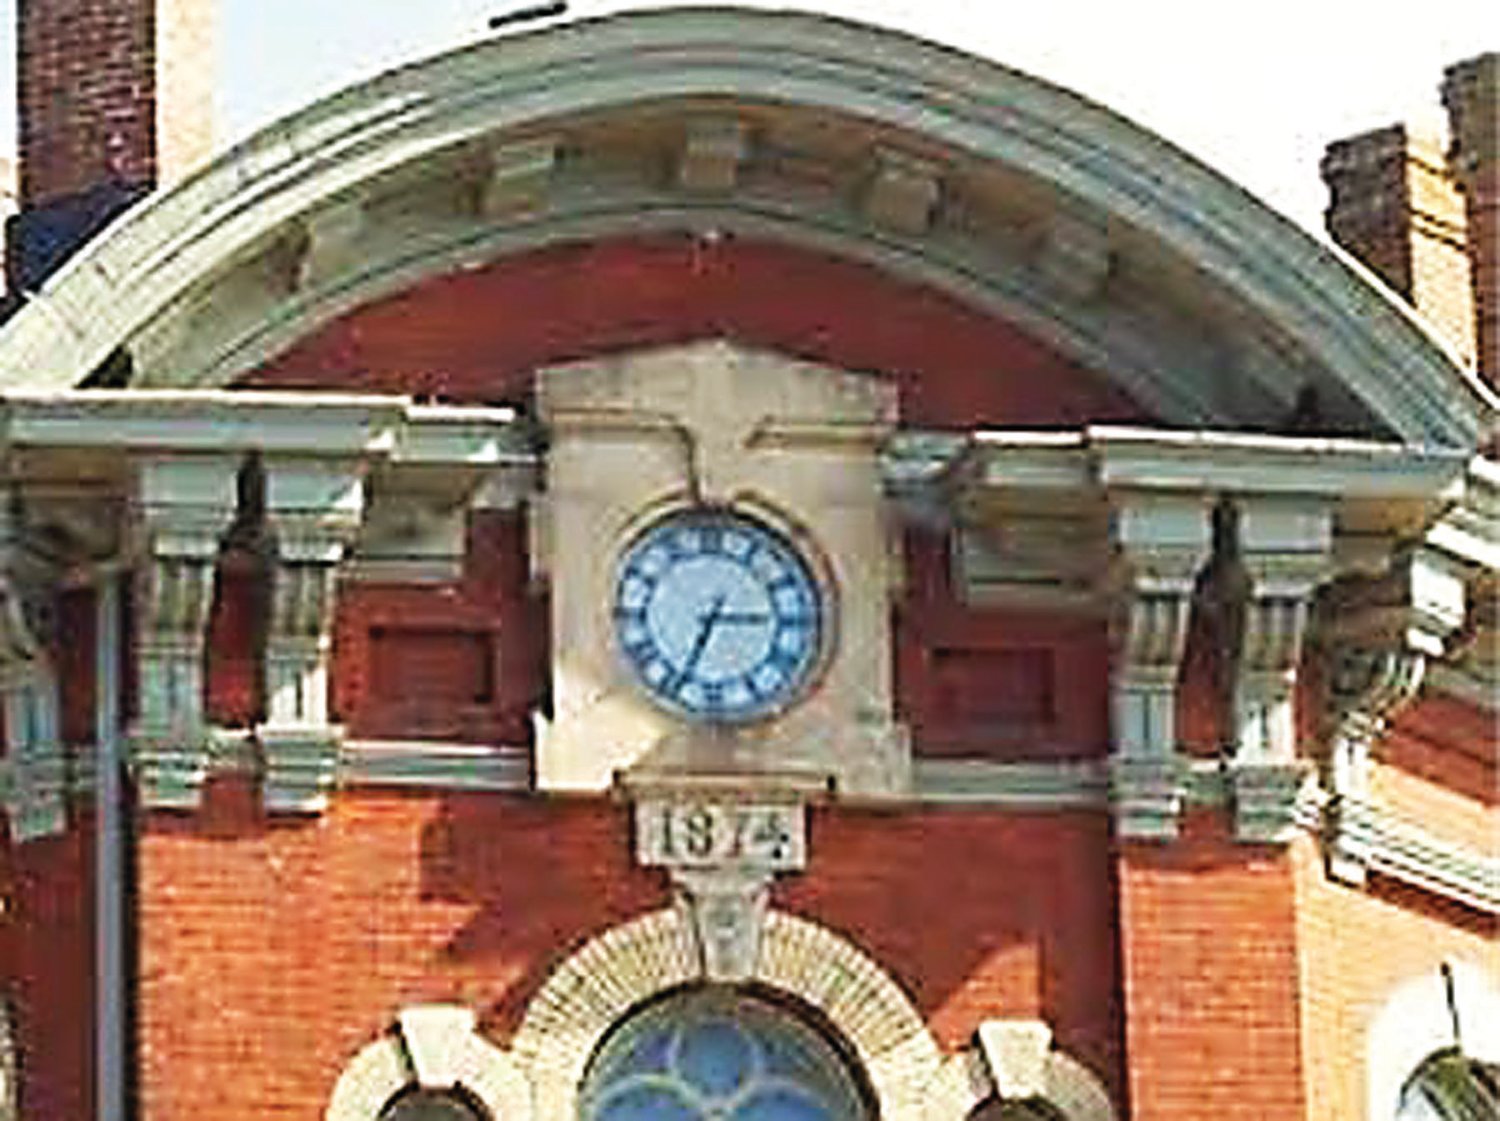 On the diagonal façade of Doylestown’s Lenape Hall, at the corner of State and Main Streets, is mounted a clock made by Louis Spellier. Immediately below the clock is a block, which bears the date of 1874.